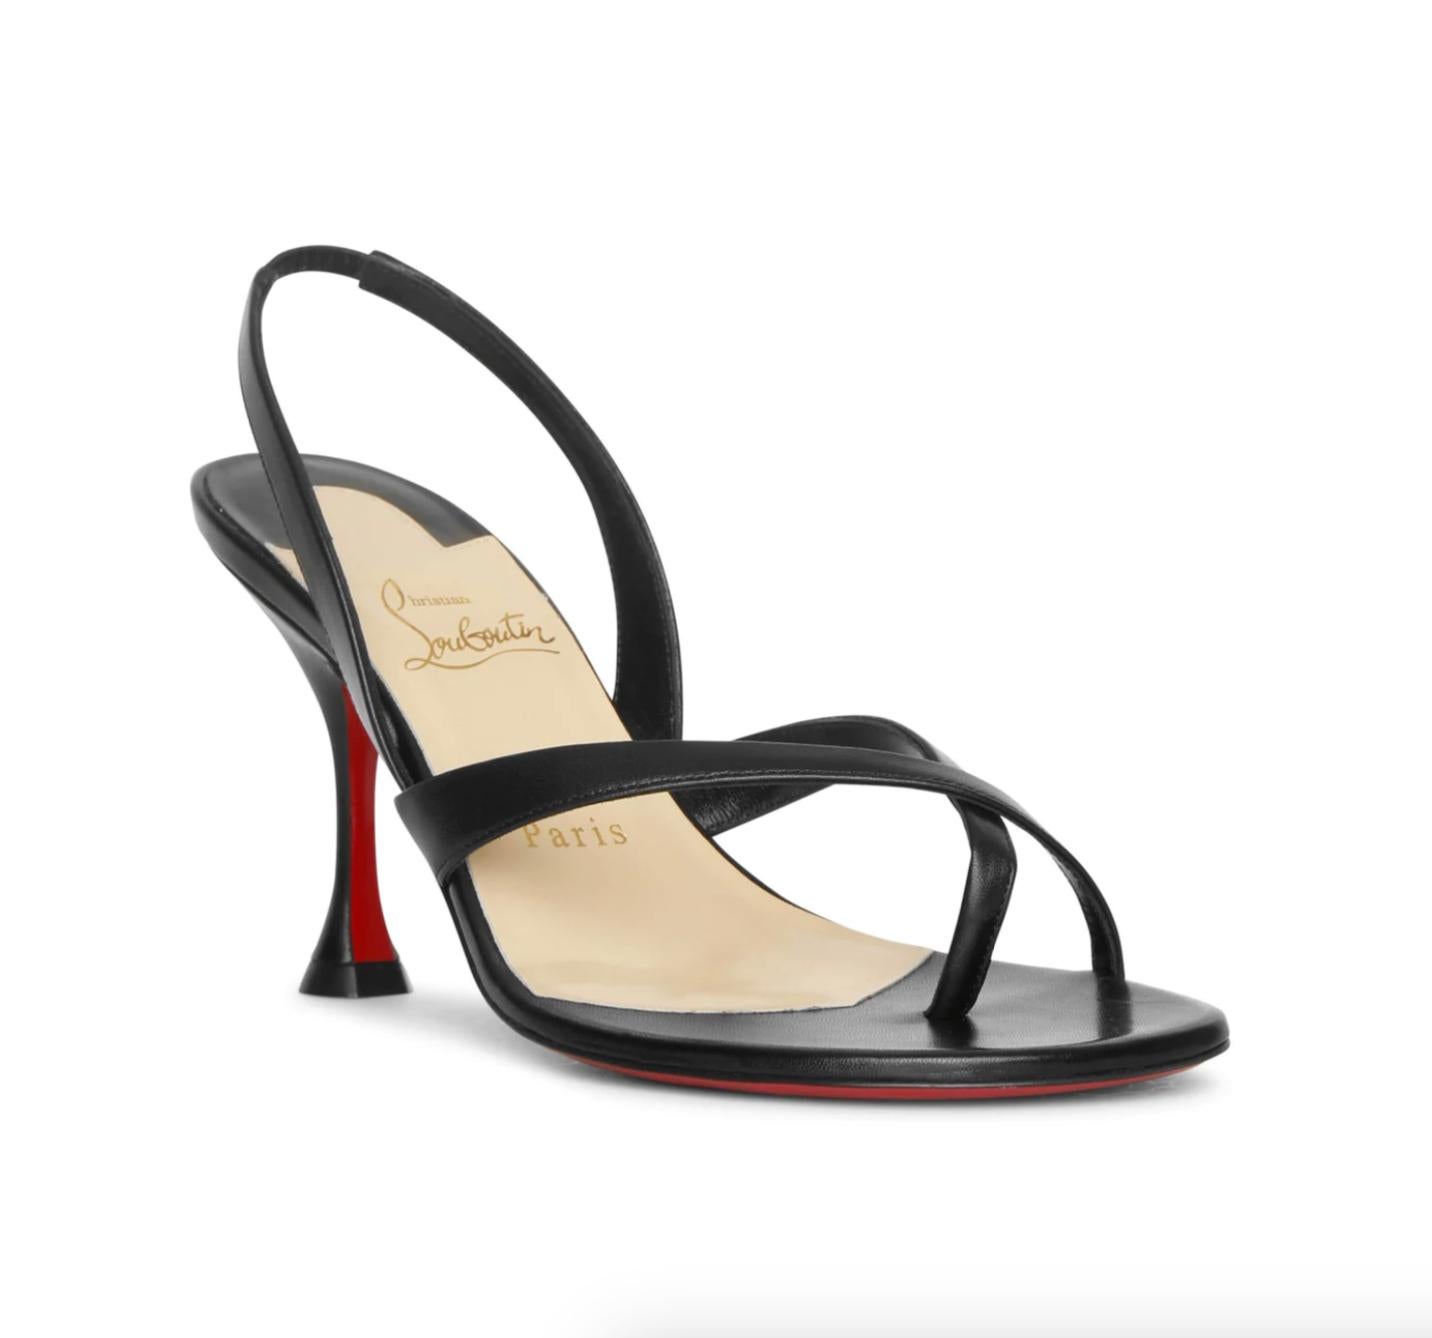 Black leather sandals from Christian Louboutin. The Taralita sandals have a 85mm heel, an open toe and crisscross straps in front, elastic insert in the slingback strap in the back and a fluted shaped heel. Brand new, never worn. Comes in all the